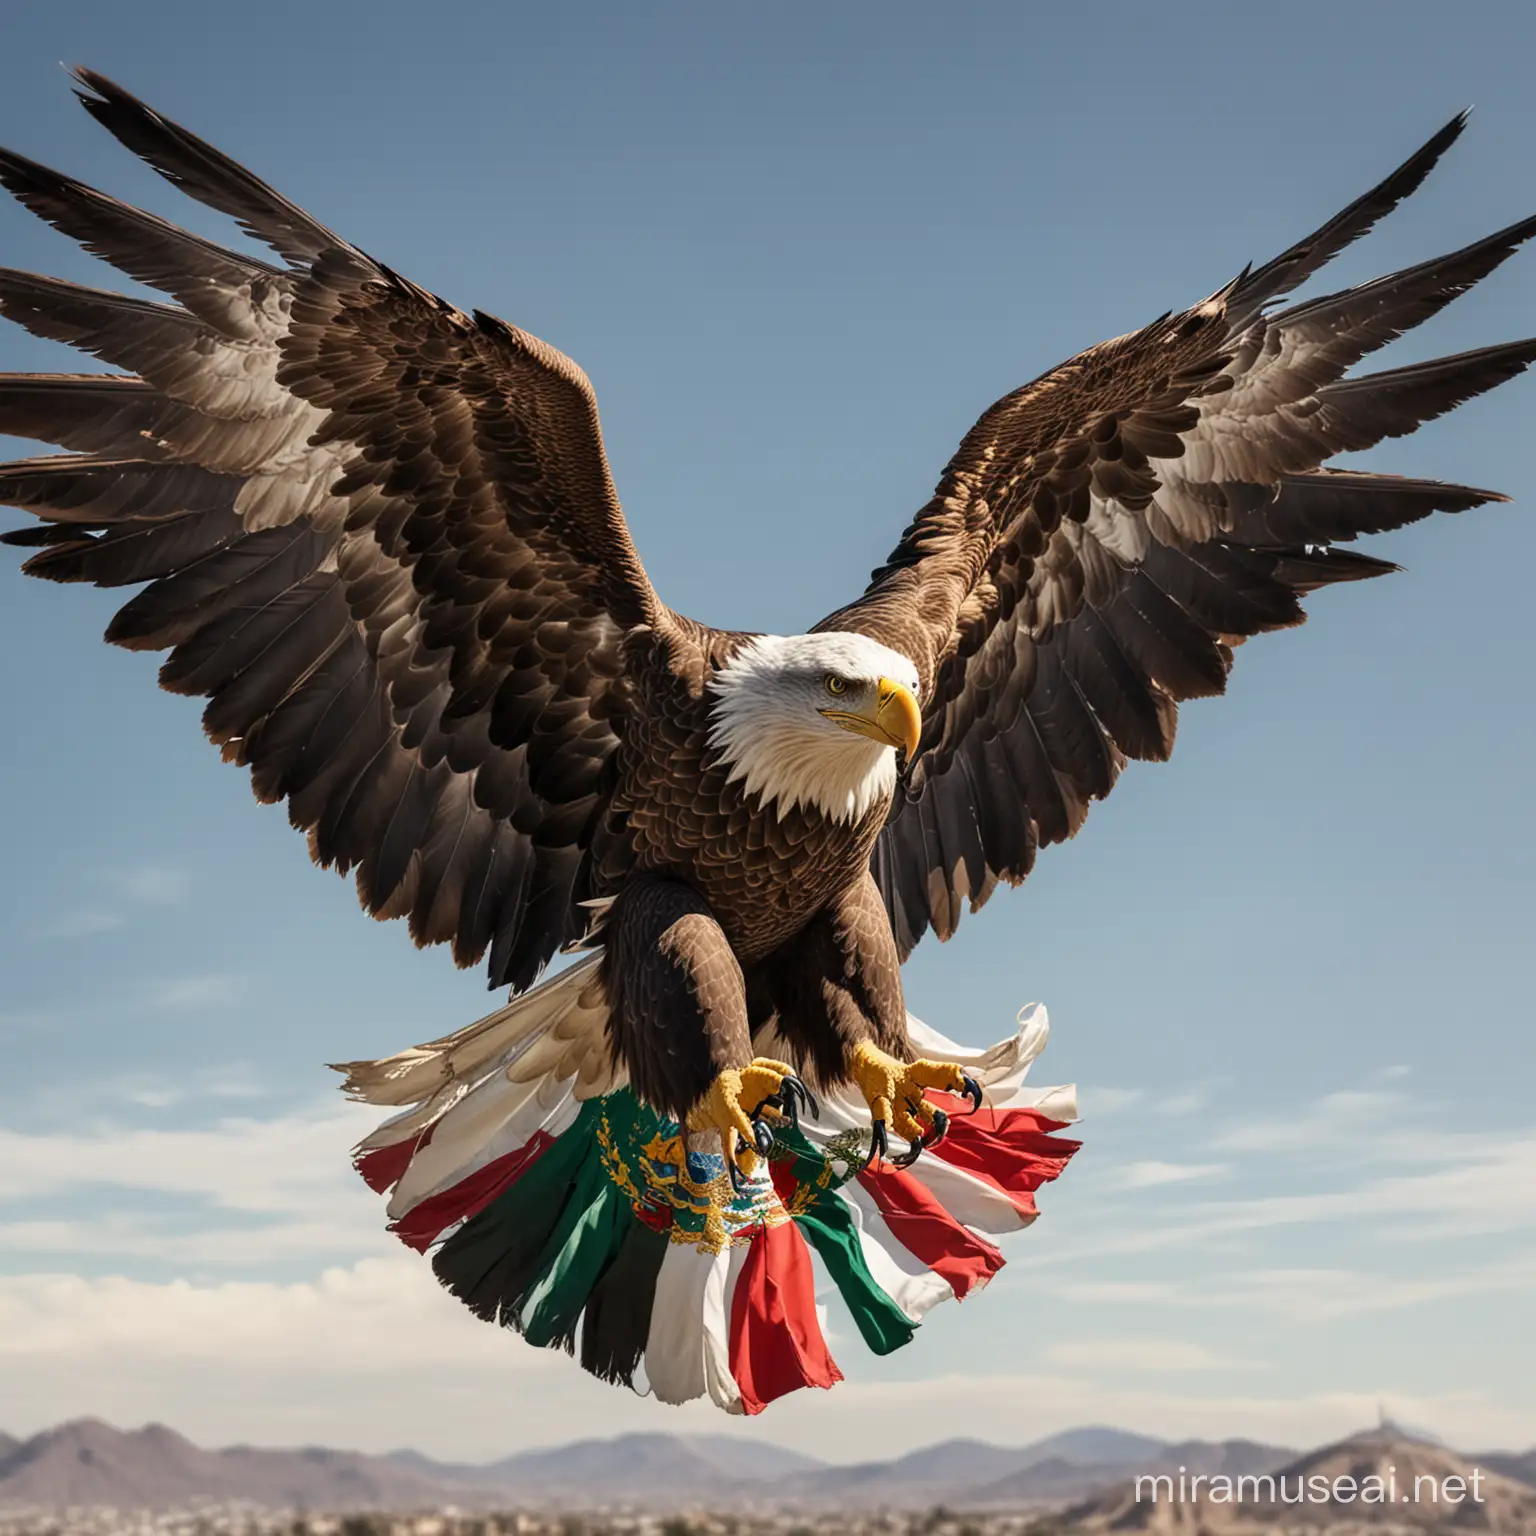 extreme high detail image of a large eagle flying over Mexico. the eagle is carrying the mexican flag